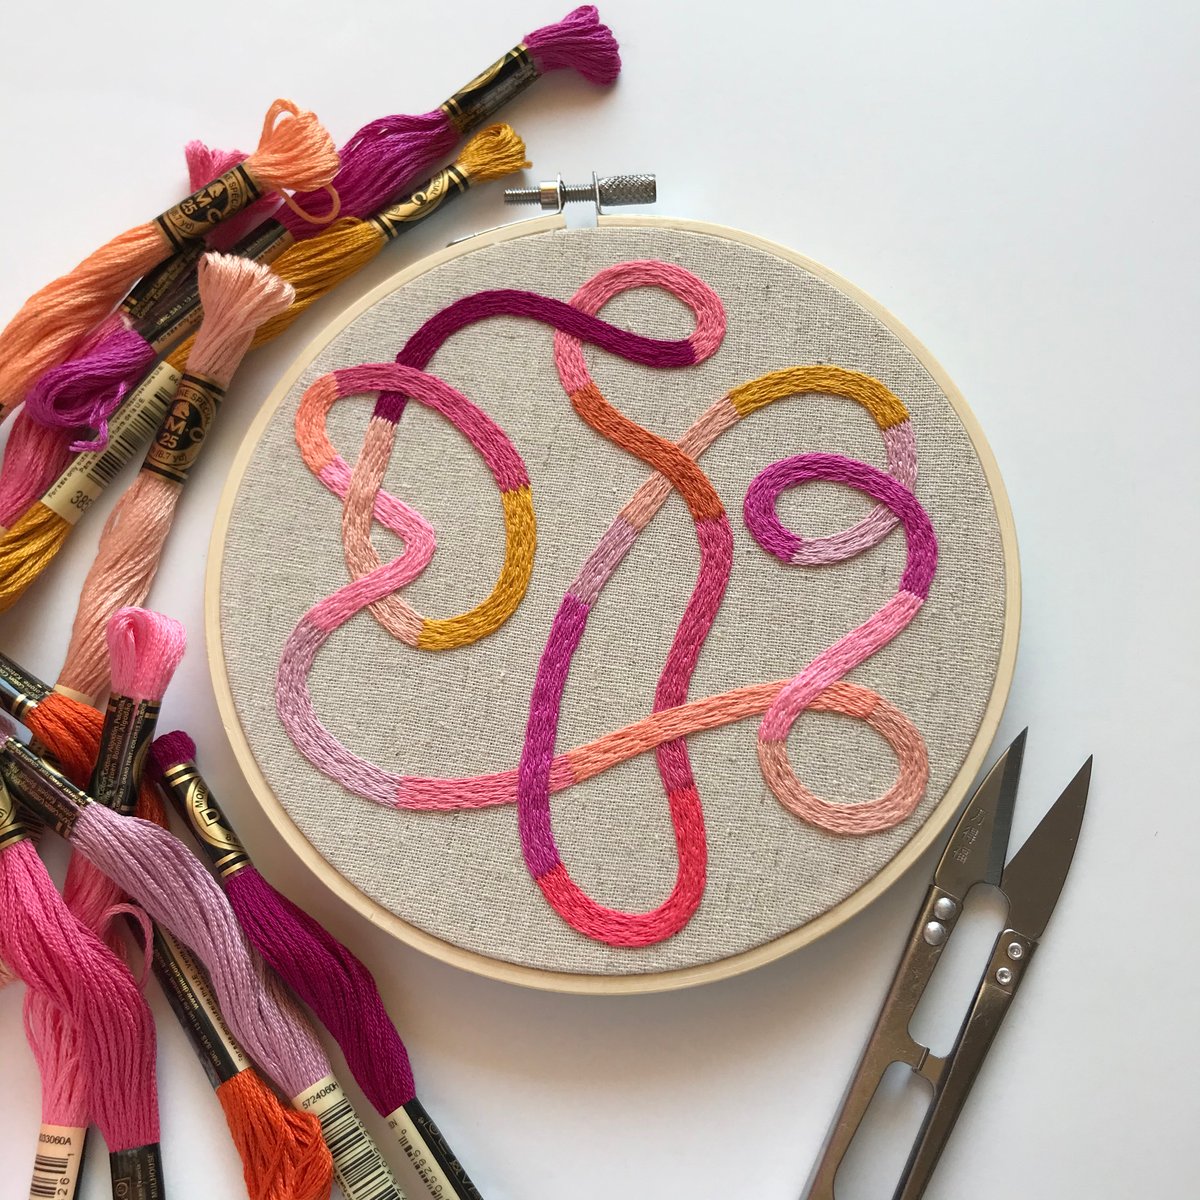 Tangled Threads - HAND EMBROIDERY KIT + VIDEO TUTORIAL